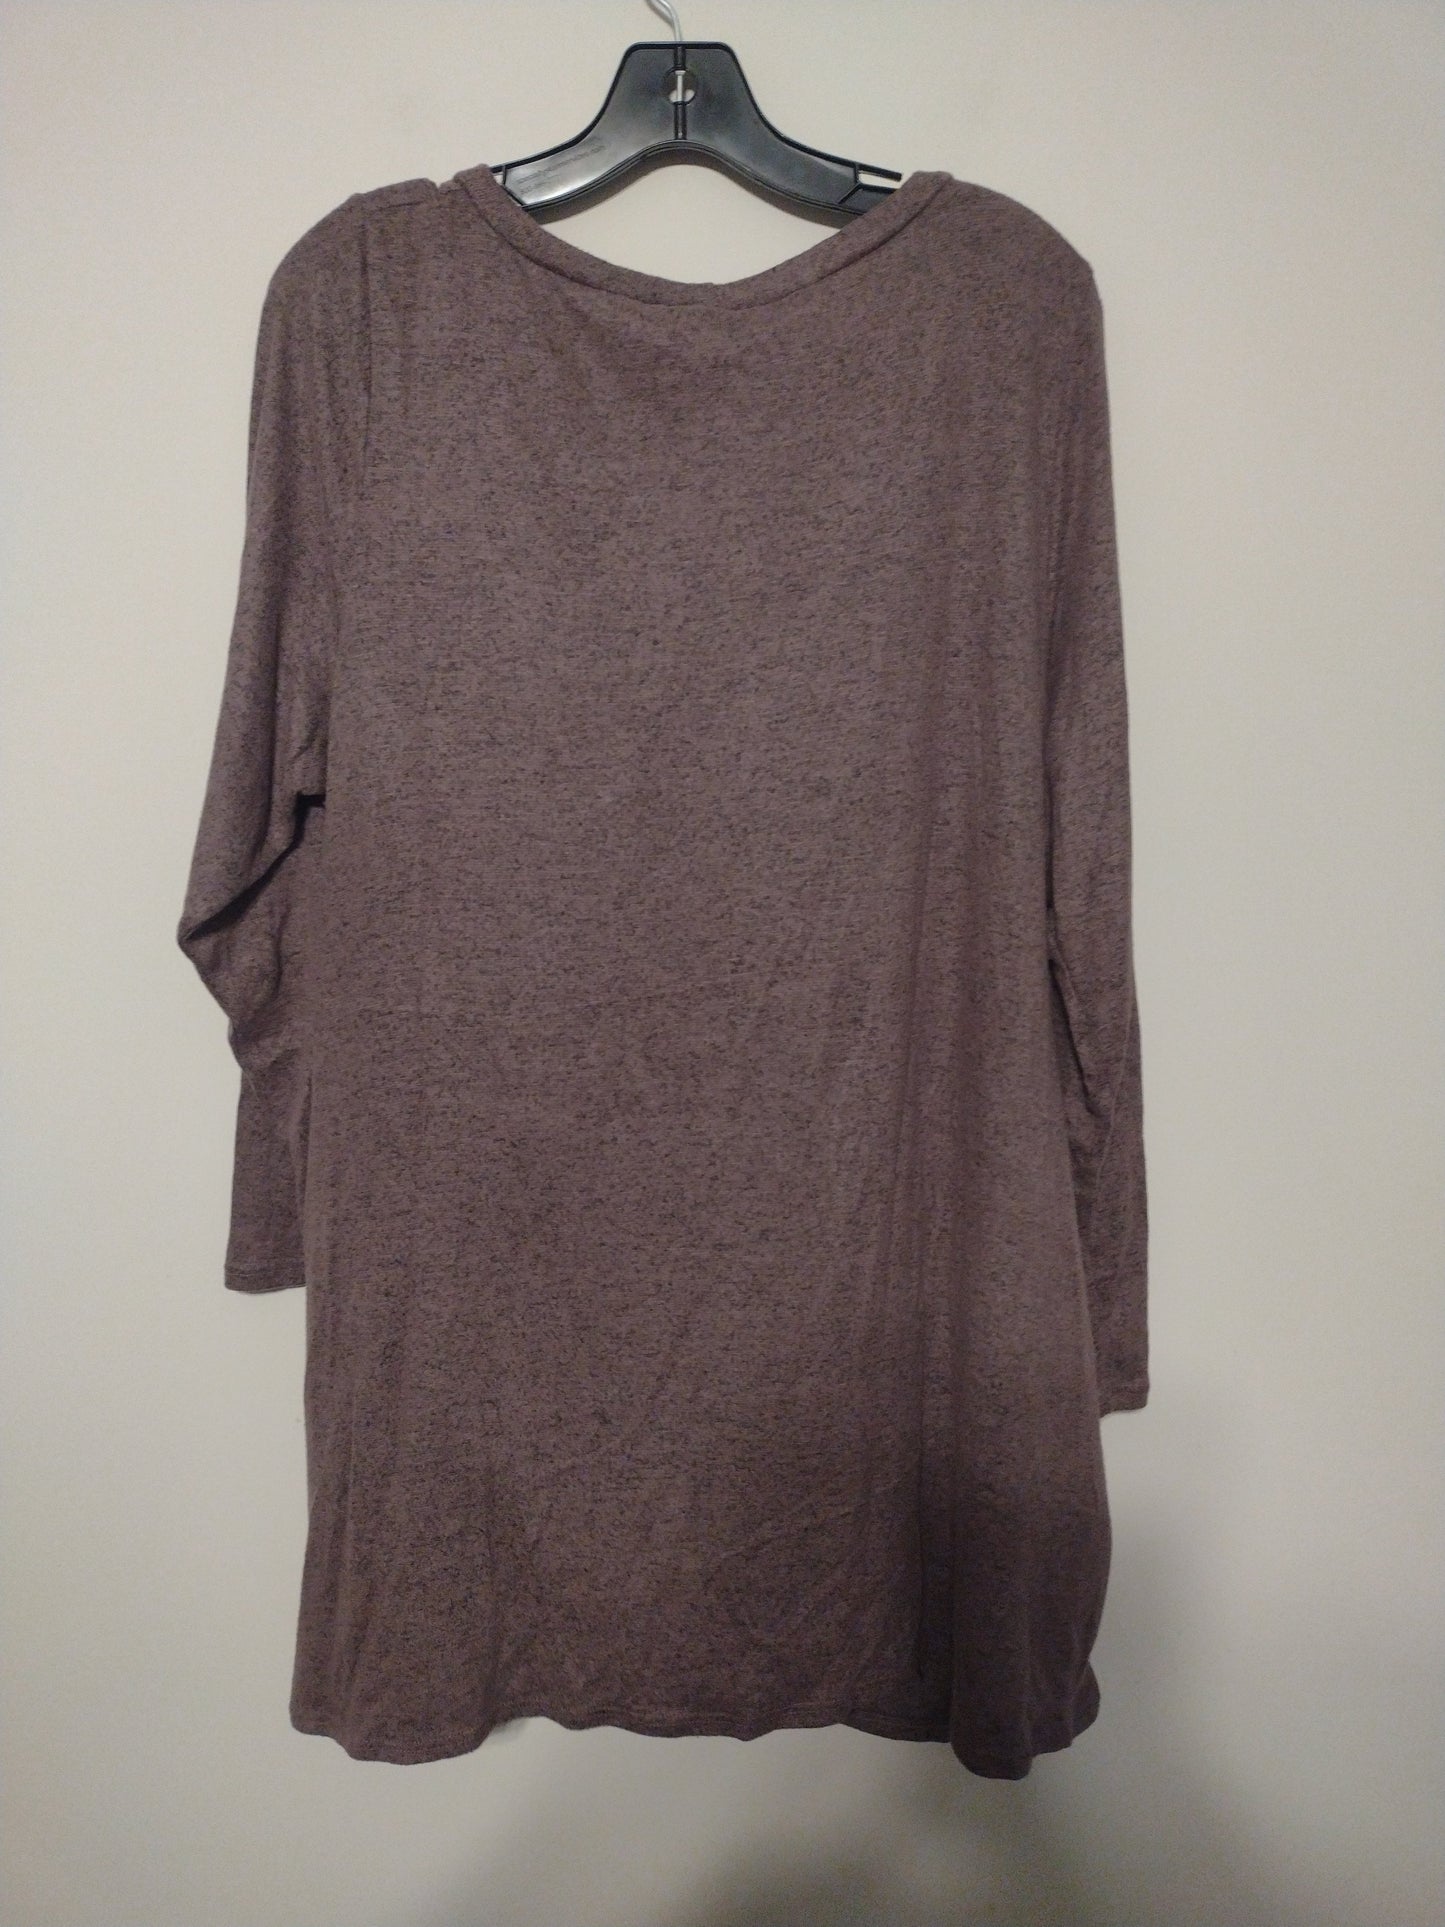 Top Long Sleeve By Emerald  Size: 2x